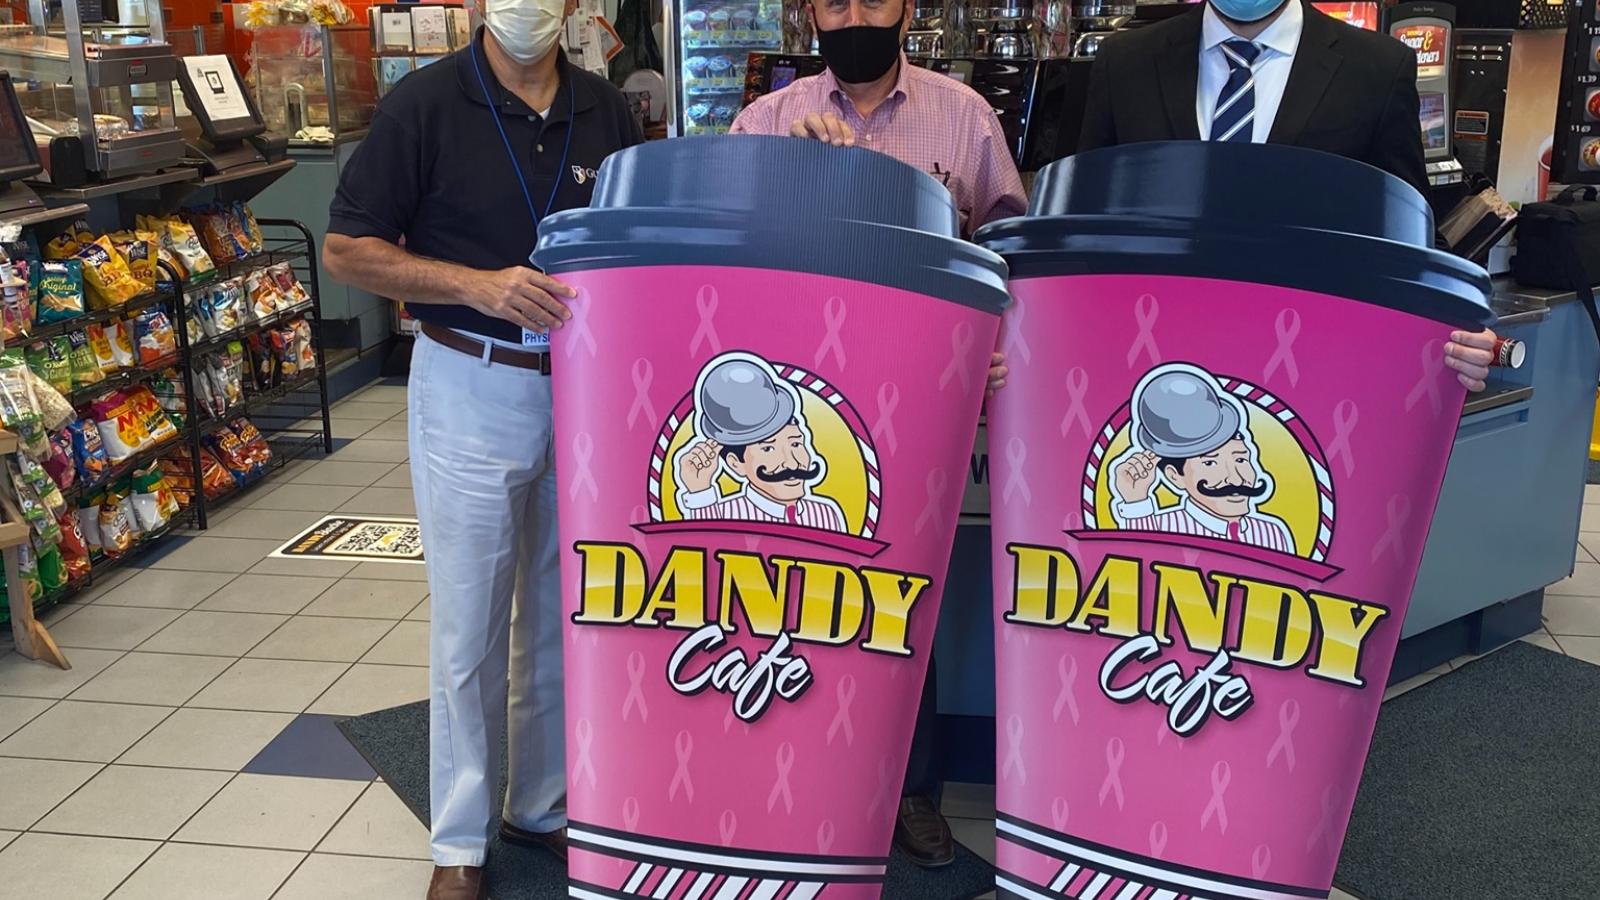 Dandy Pink Cups Campaign Raises More Than $7,600 for Guthrie Breast Care Fund